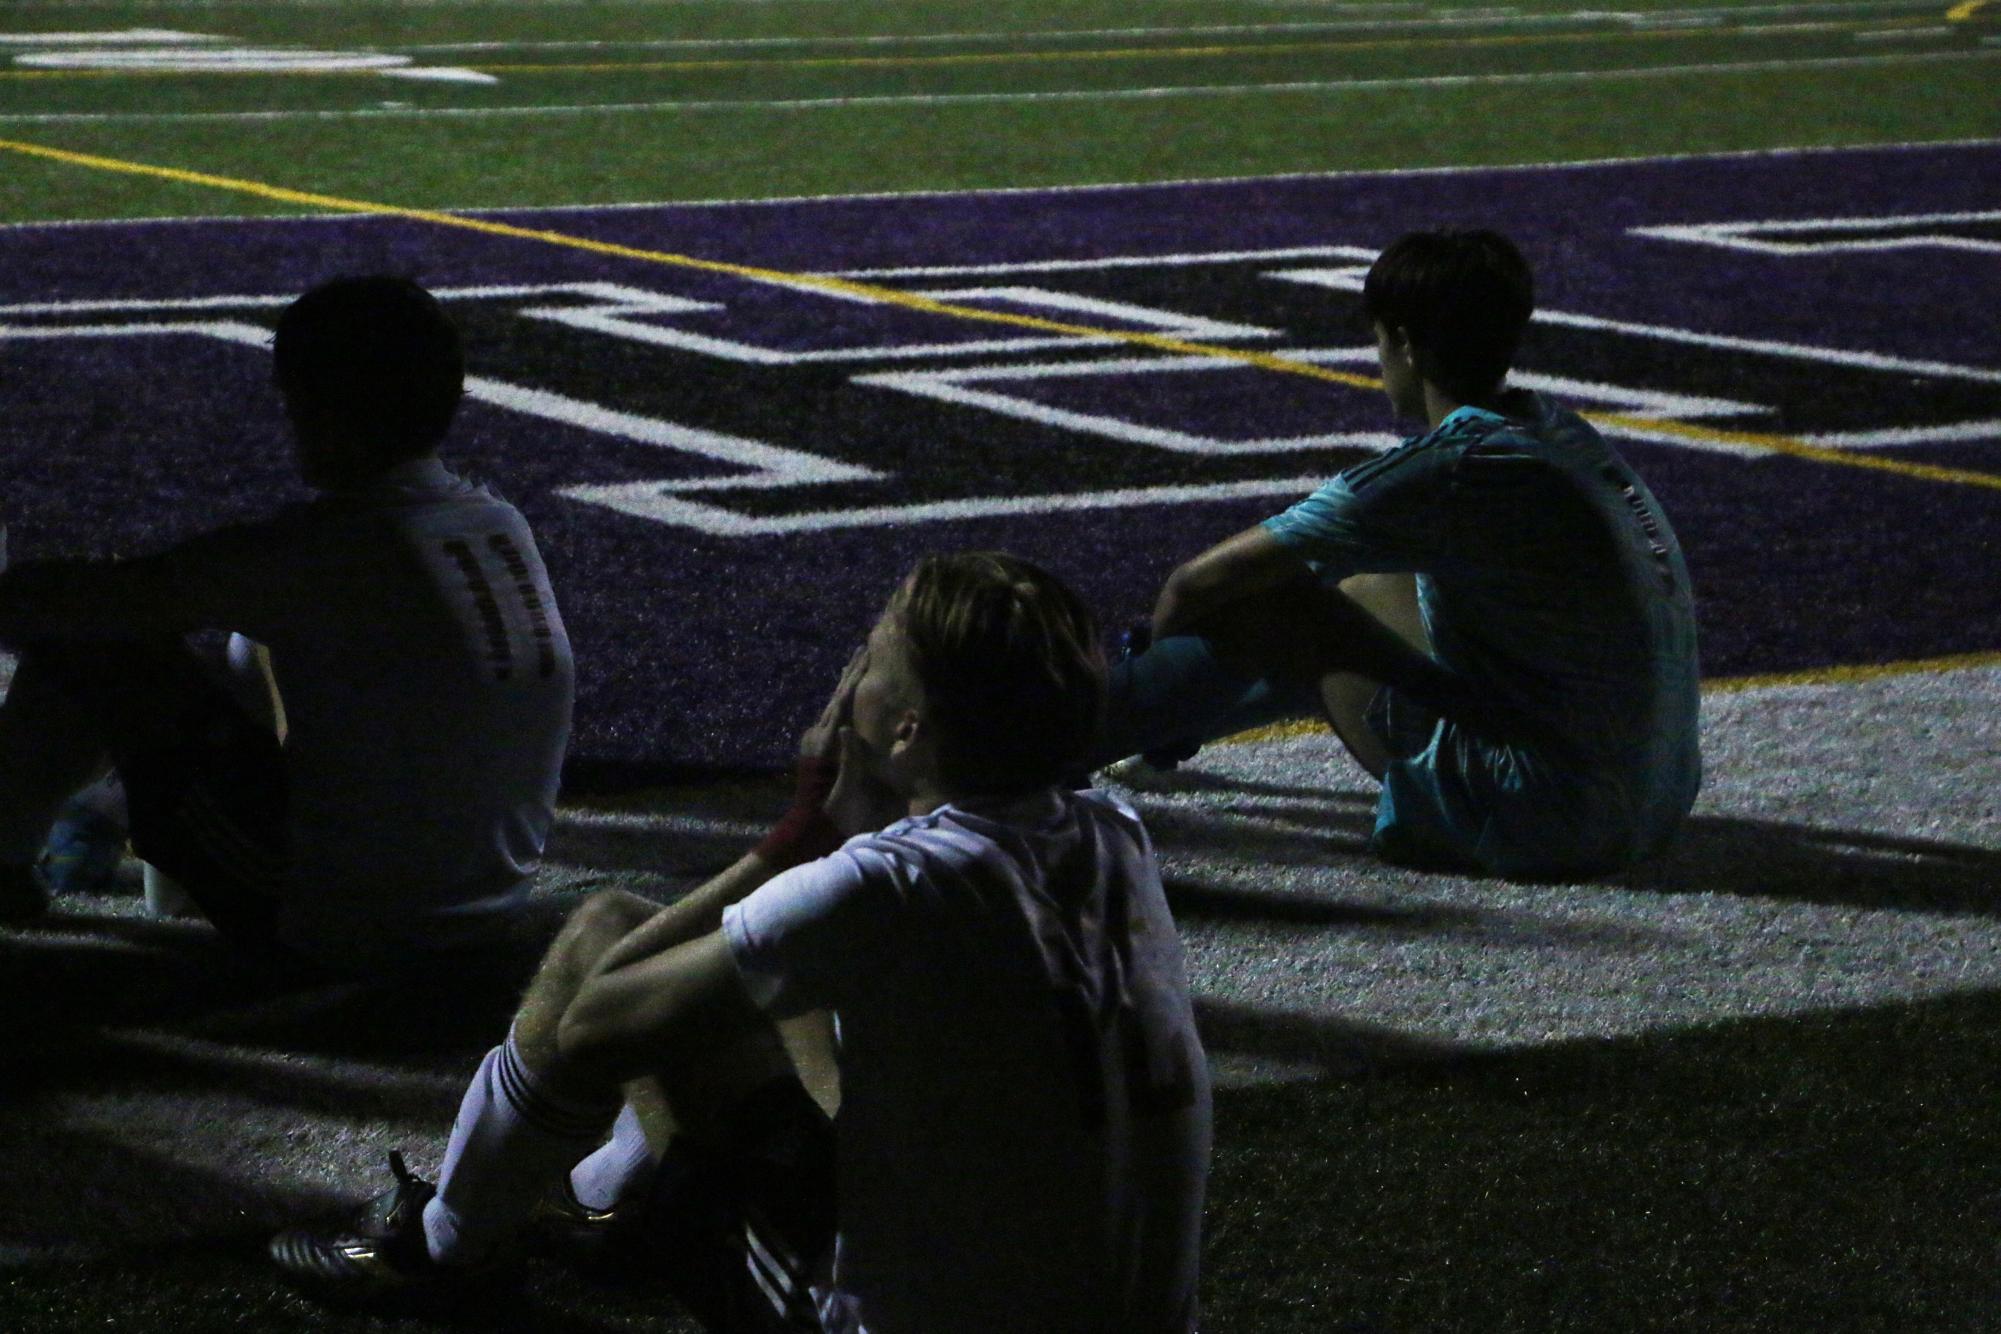 West players refocus before the second half as they sit on the turf. 